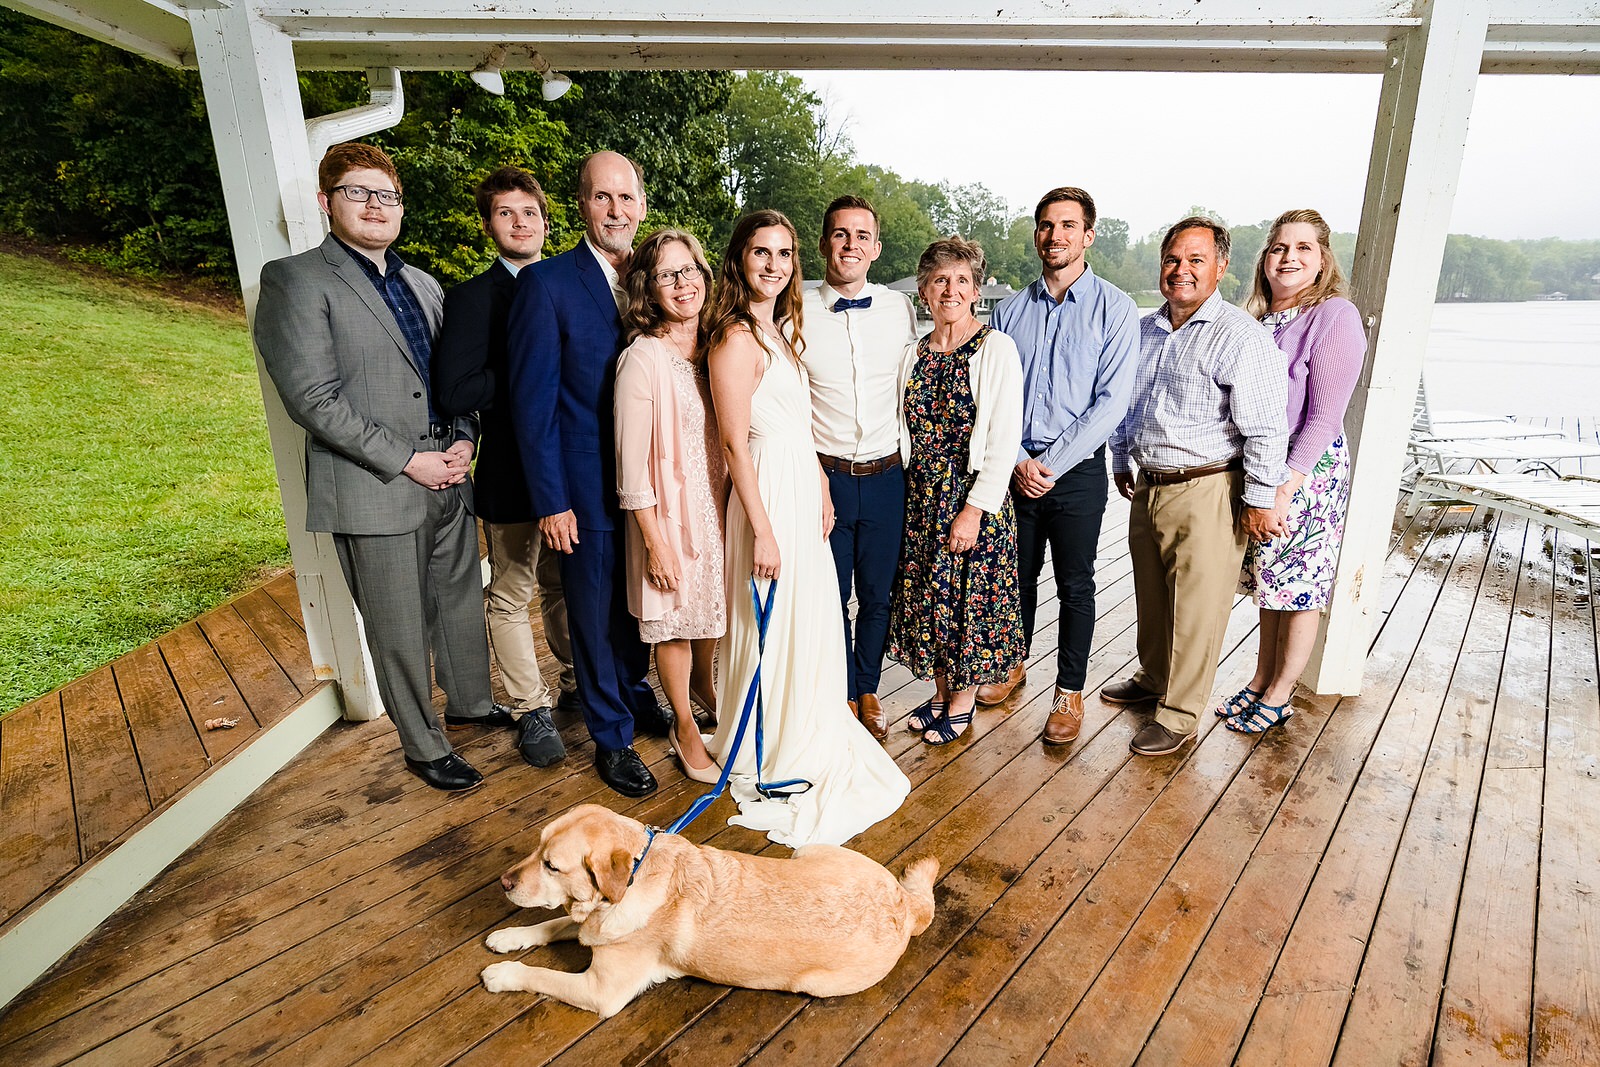 all guests in attendance pose for a picture after an intimate backyard wedding ceremony